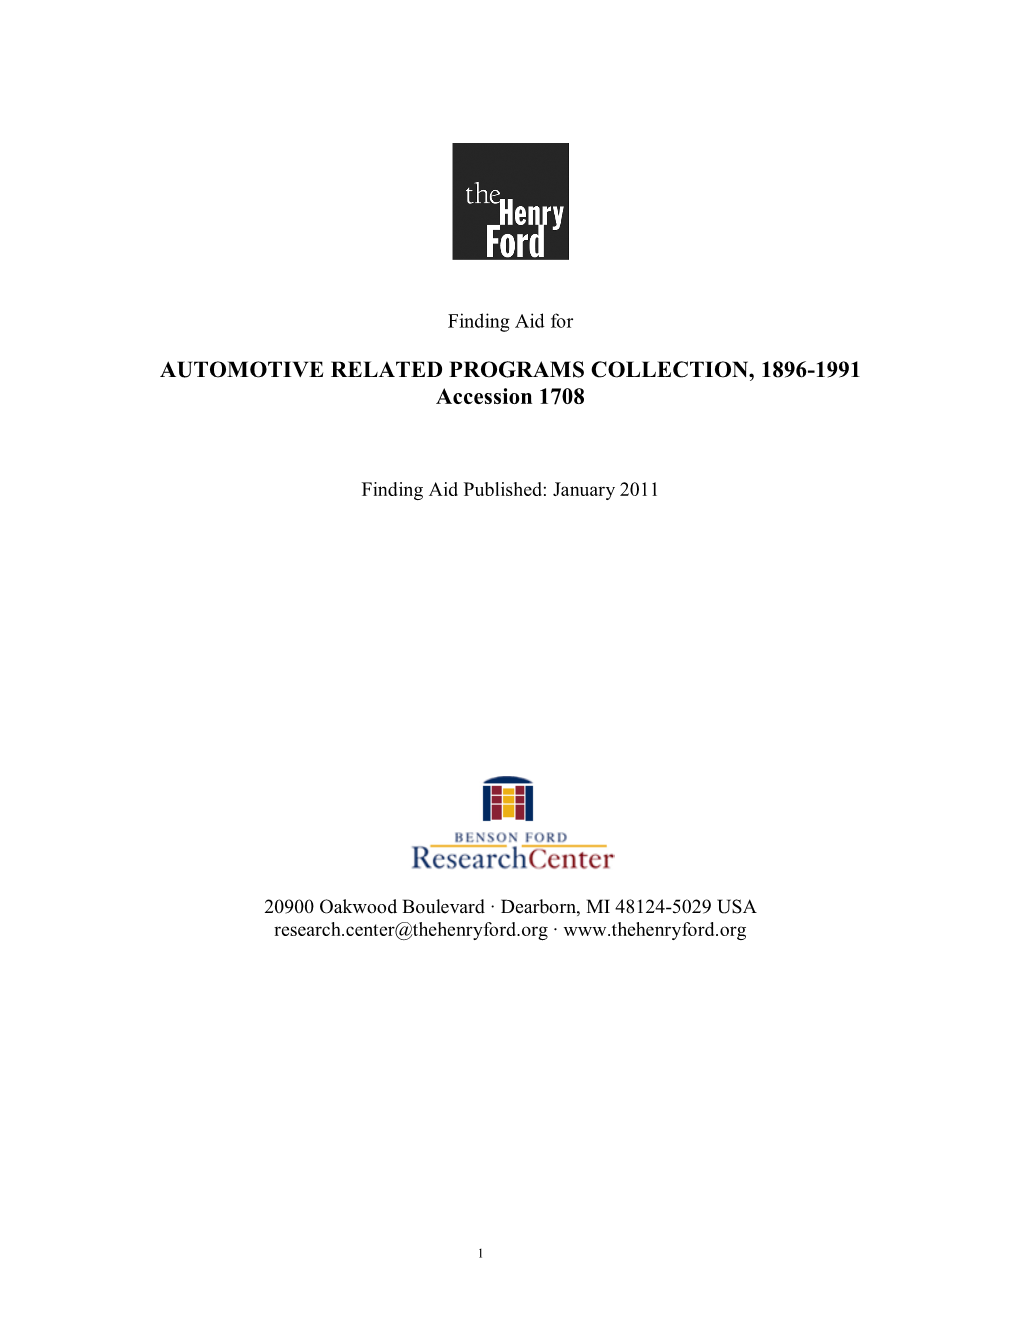 Finding Aid for the Automotive Related Programs Collection, 1896-1991